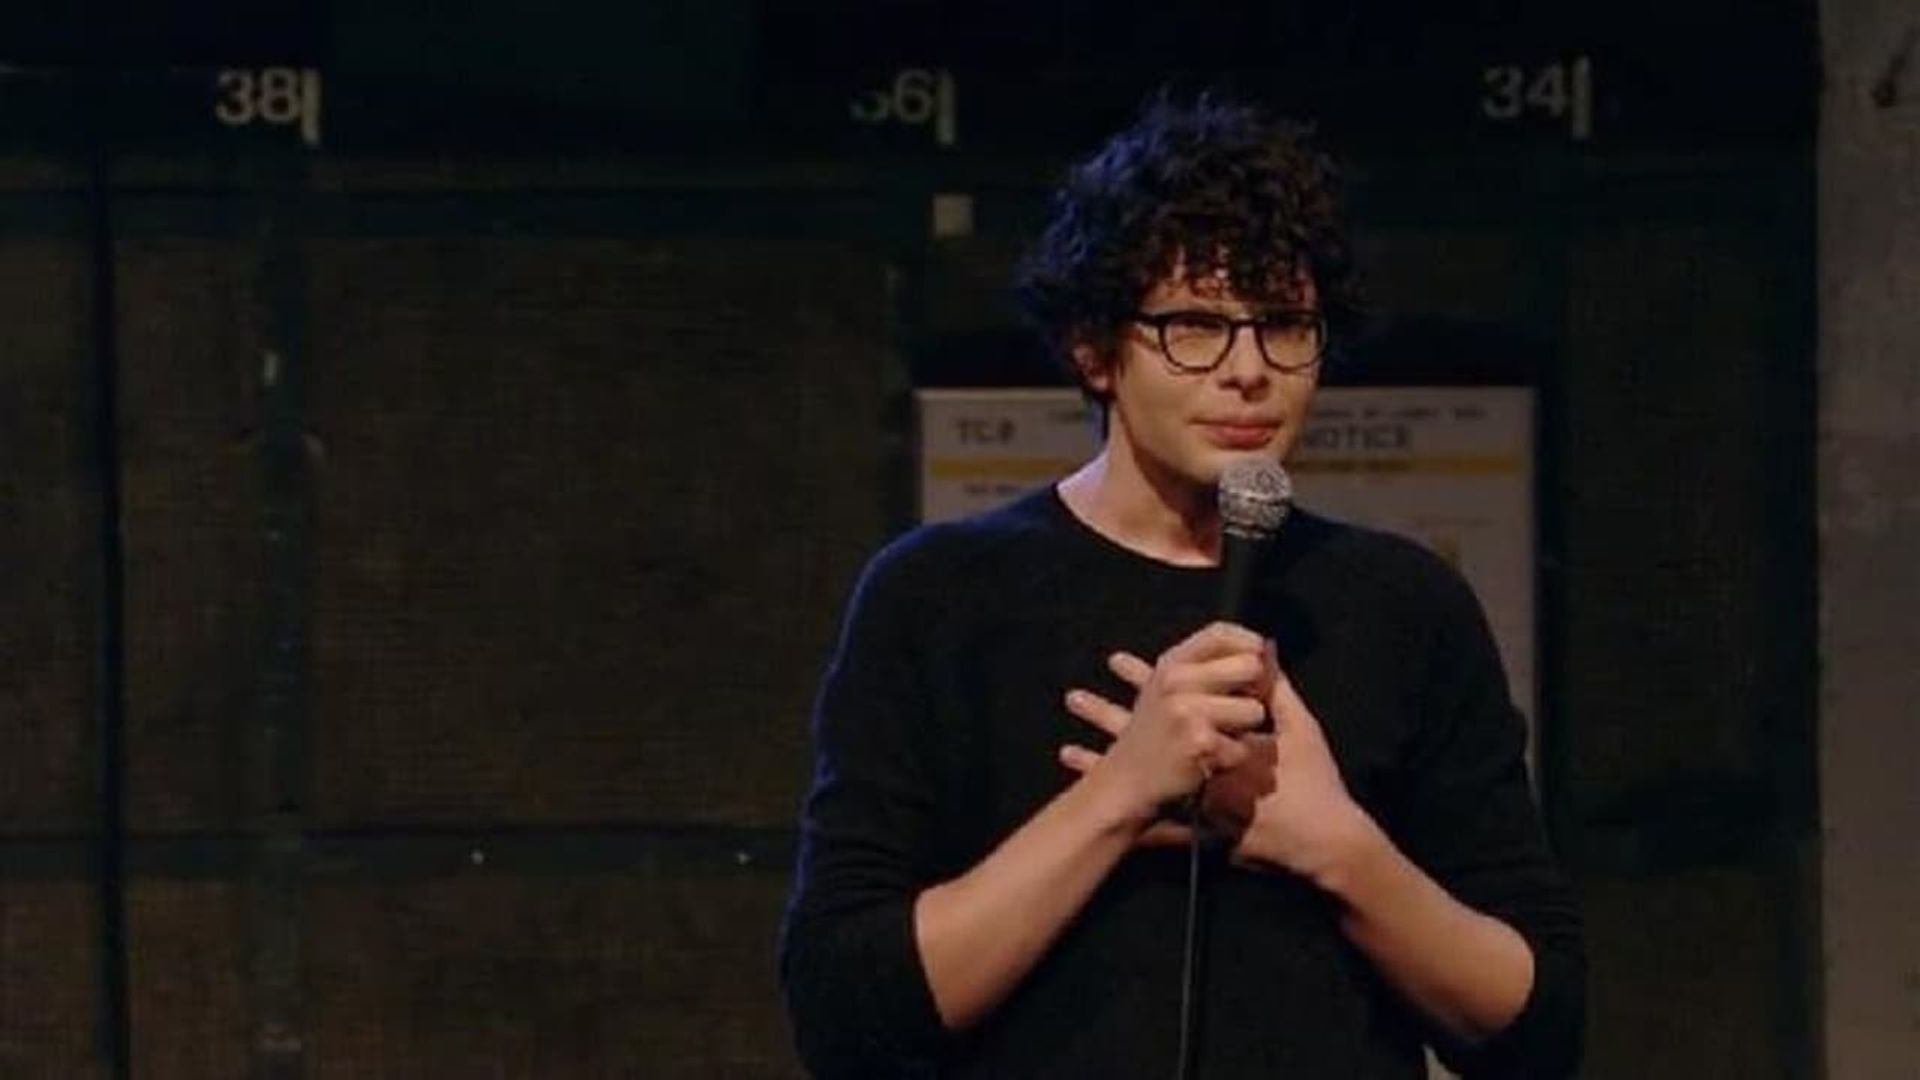 Simon Amstell: Numb background